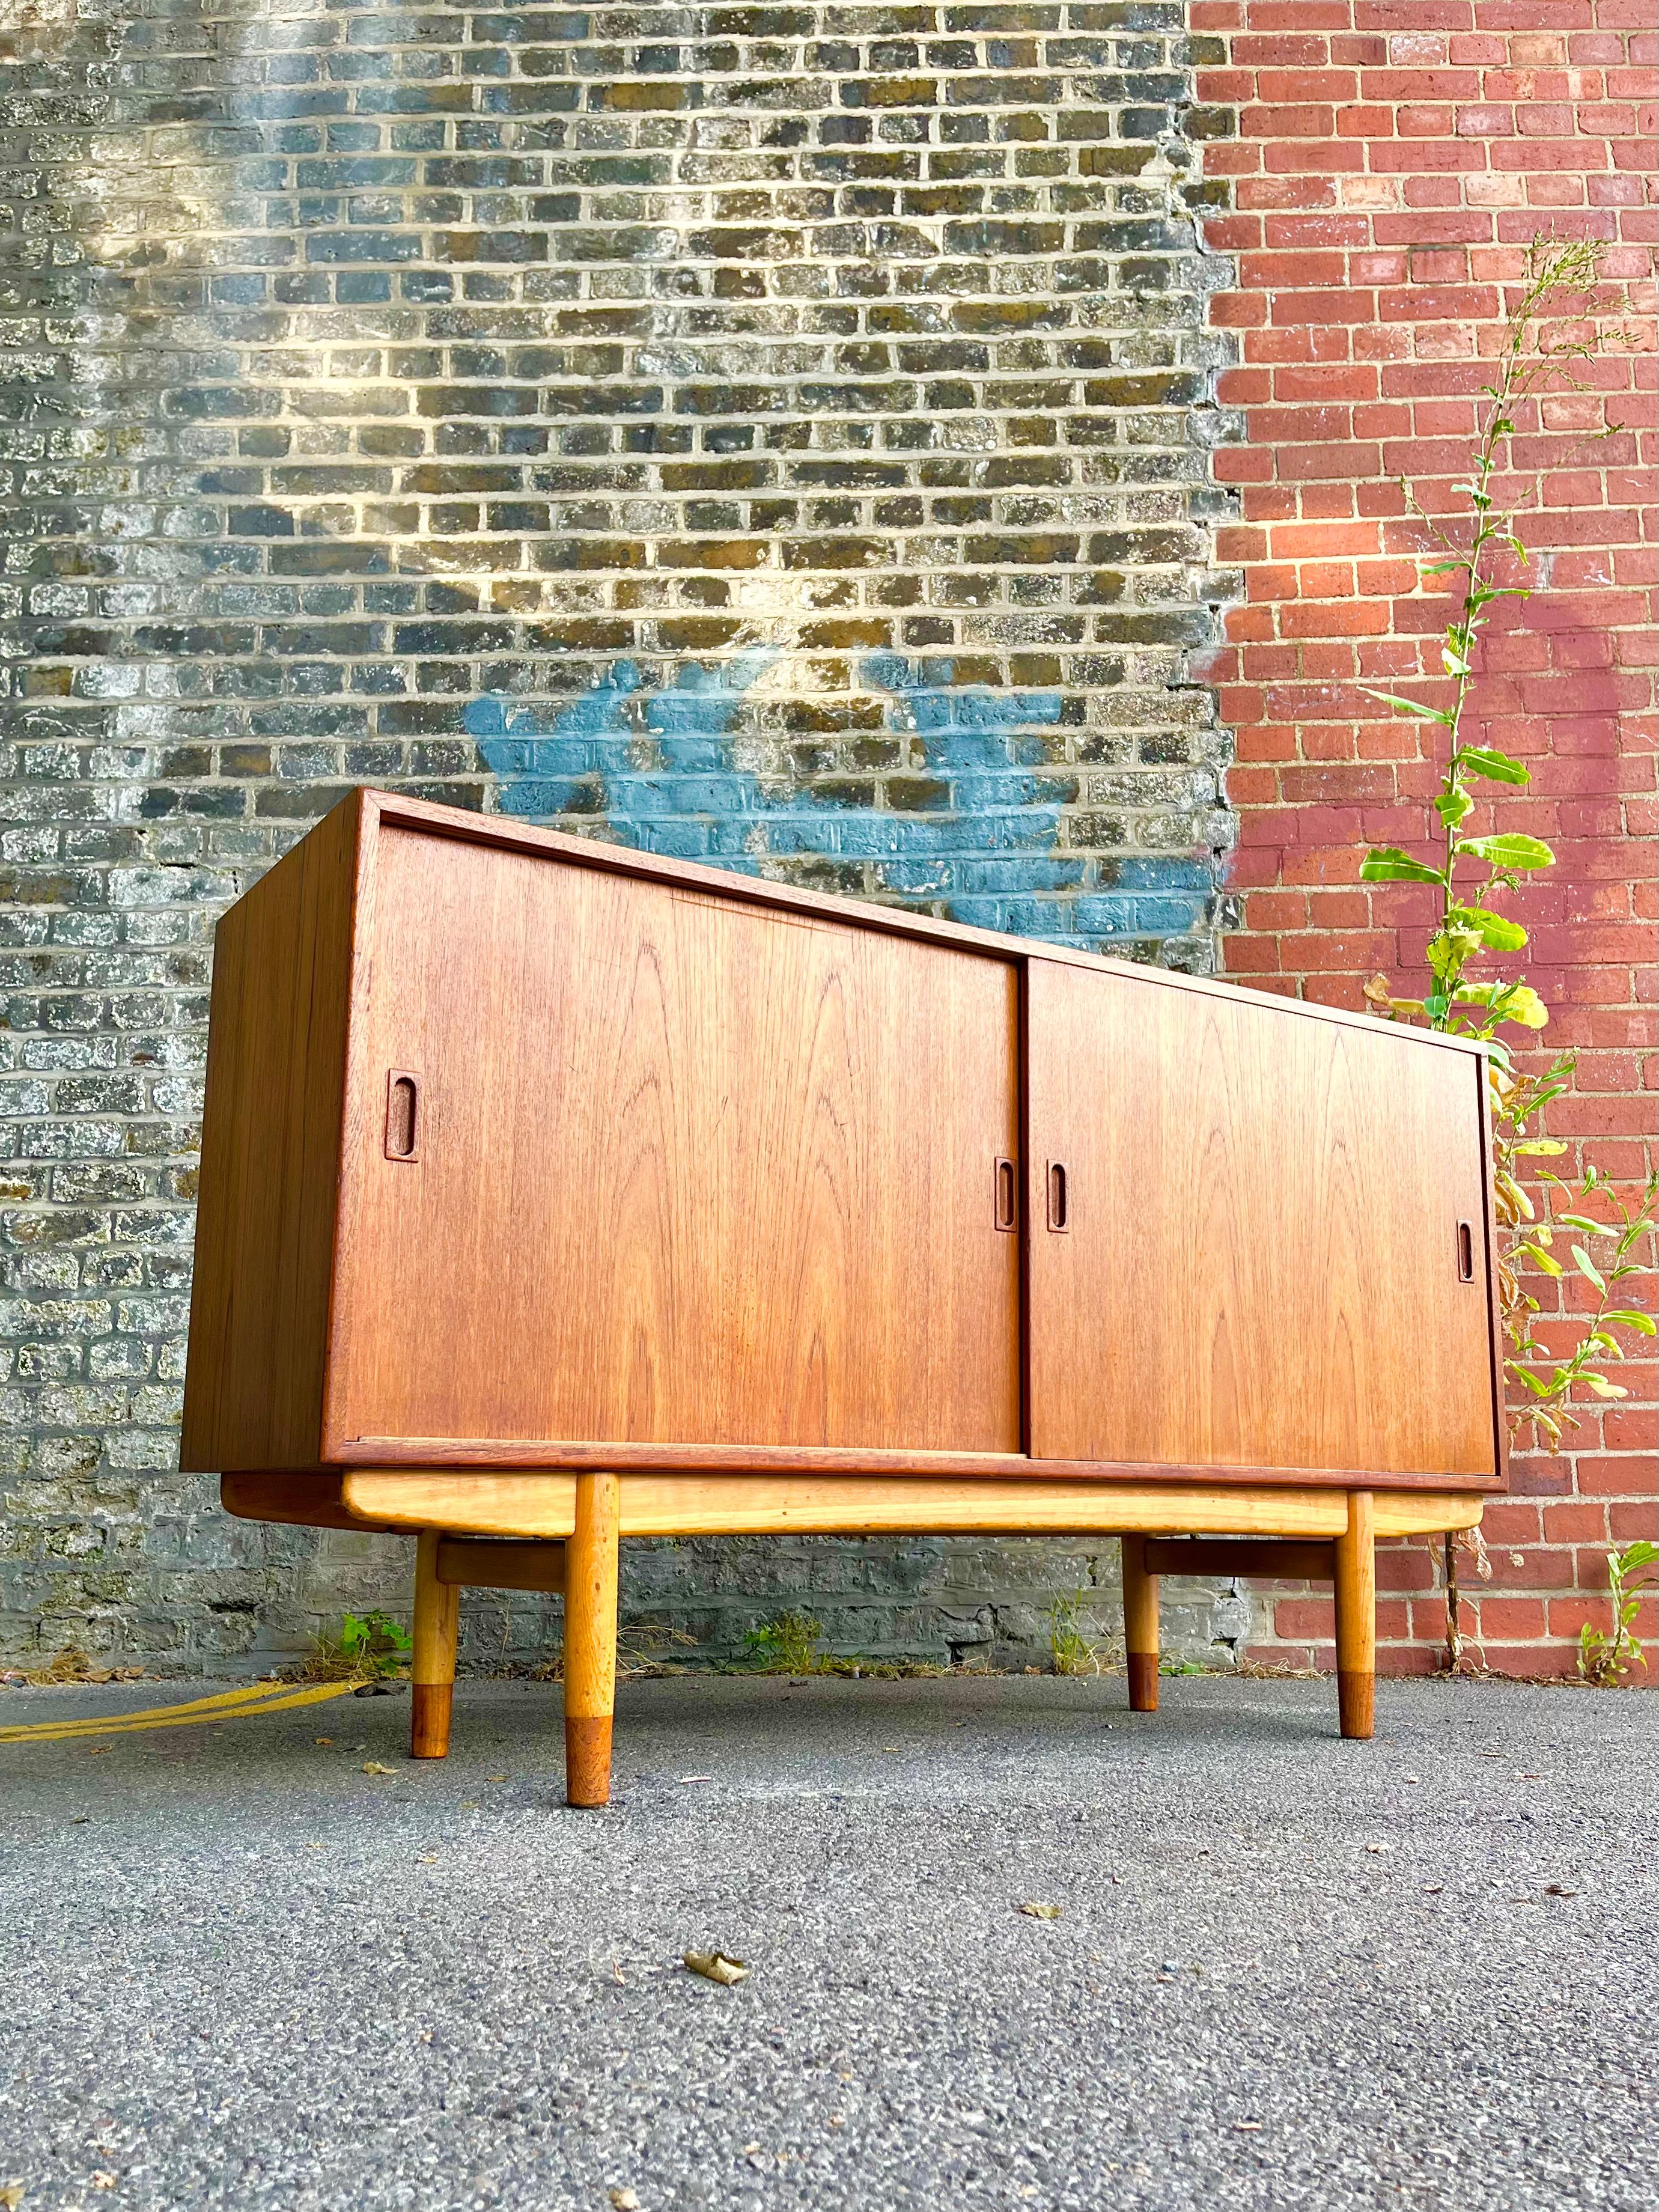 A very handsome Børge Mogensen model 160 sideboard!
Produced in Denmark during the 1950s by Søborg Møbelfabrik, it features two sliding doors which open to reveal a beech-lined interior with two adjustable shelves and four dovetail-jointed drawers.